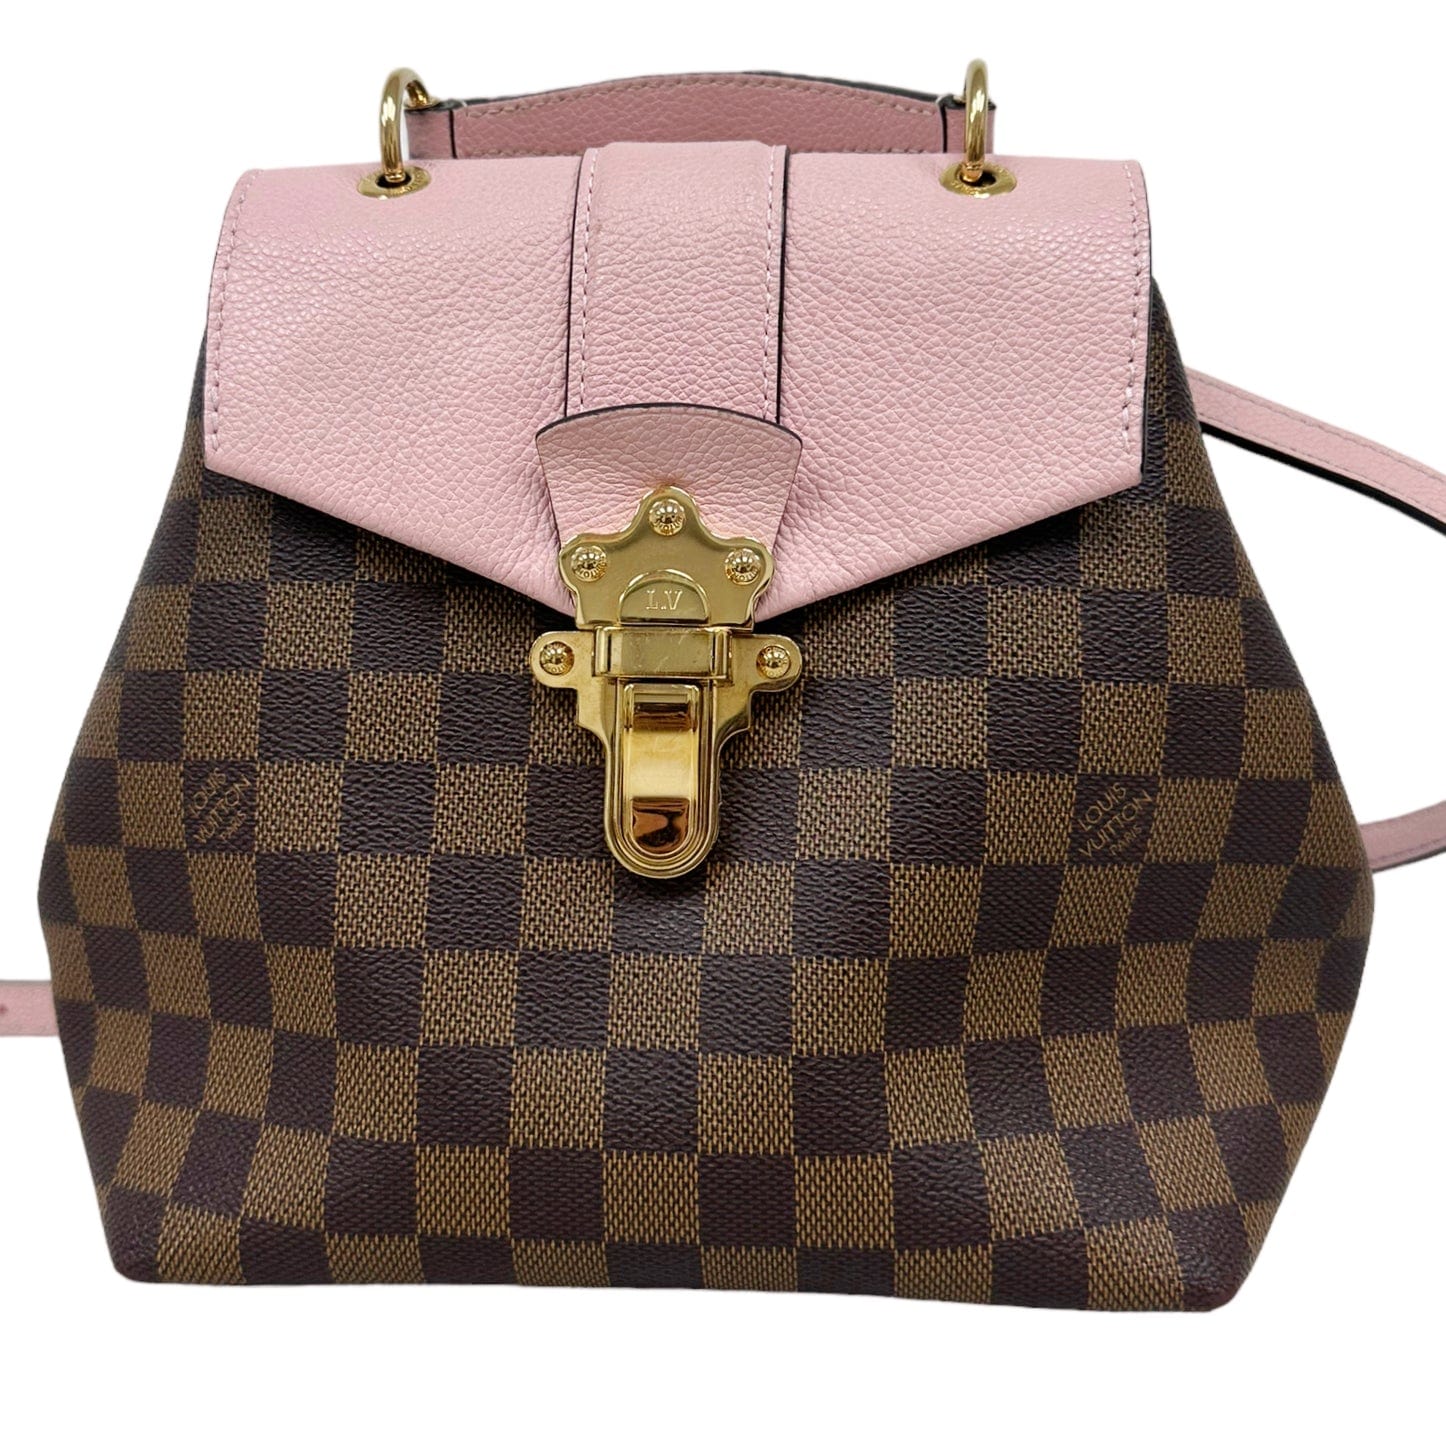 pink leather louis vuitton bag